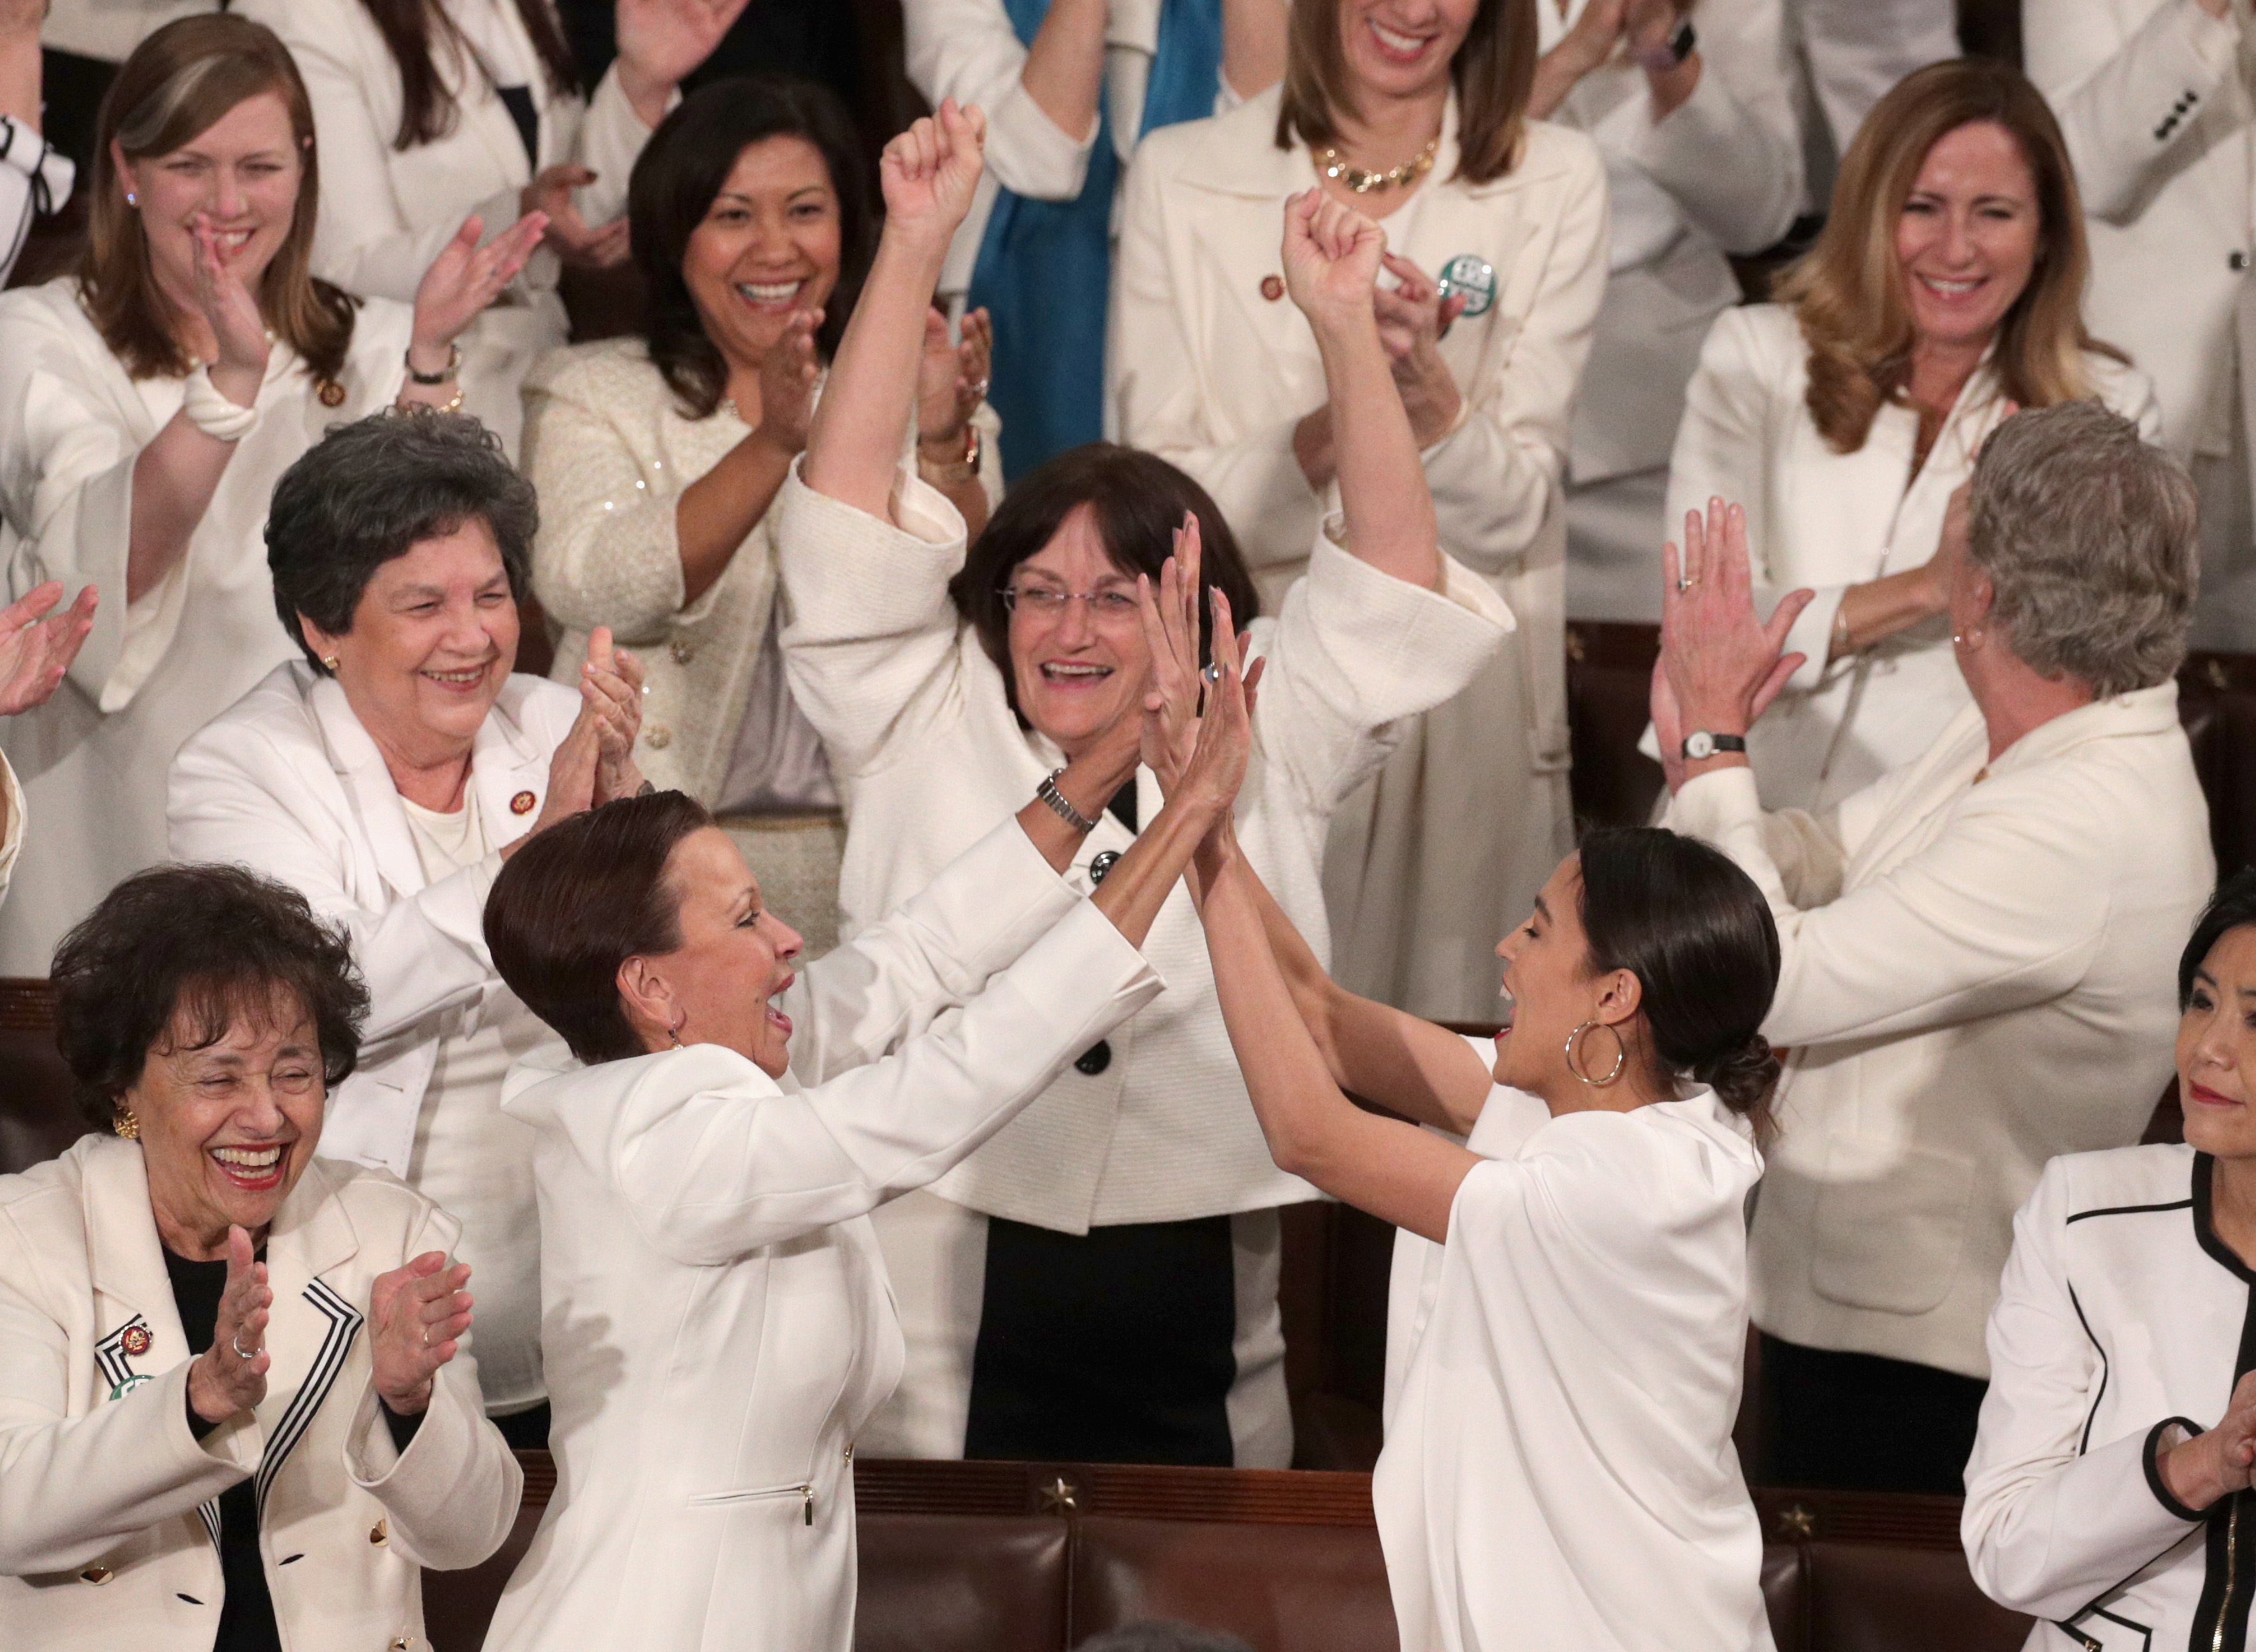 Rep. Alexandria Ocasio-Cortez (D-NY) and other female lawmakers cheer during President Donald Trump's State of the Union address in the chamber of the U.S. House of Representatives at the U.S. Capitol Building on February 5, 2019 in Washington, D.C. (Alex Wong—Getty Images)